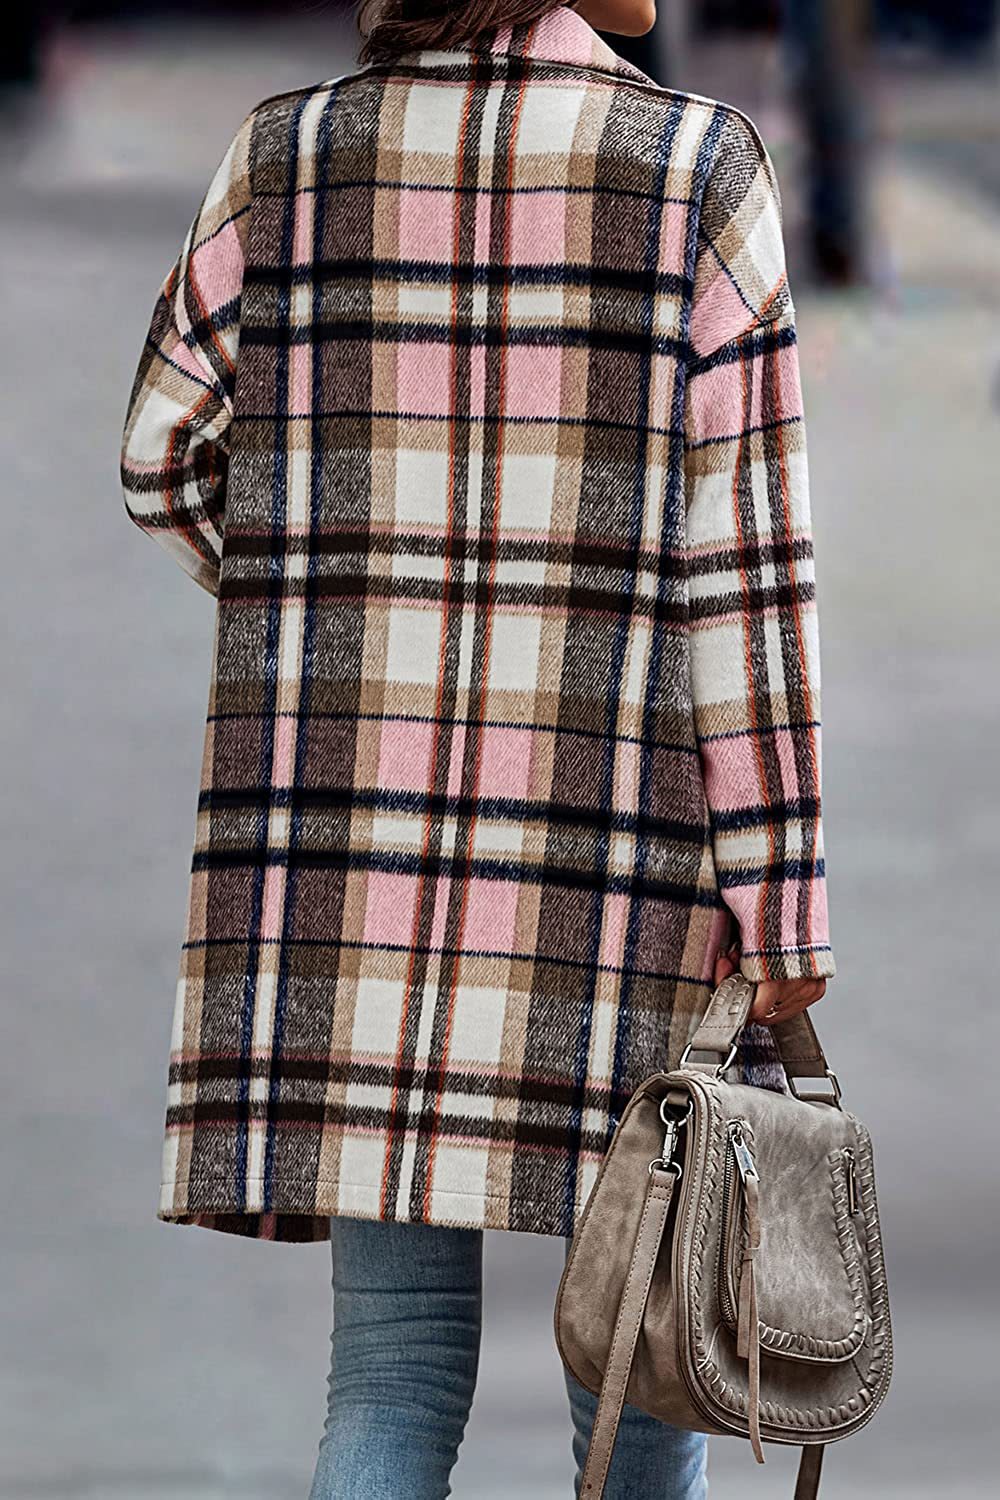 Fashion Plaid Long Jacket With Pockets Autumn And Winter New Style Turndown Collar Woolen Coat Outdoor Women Clothing